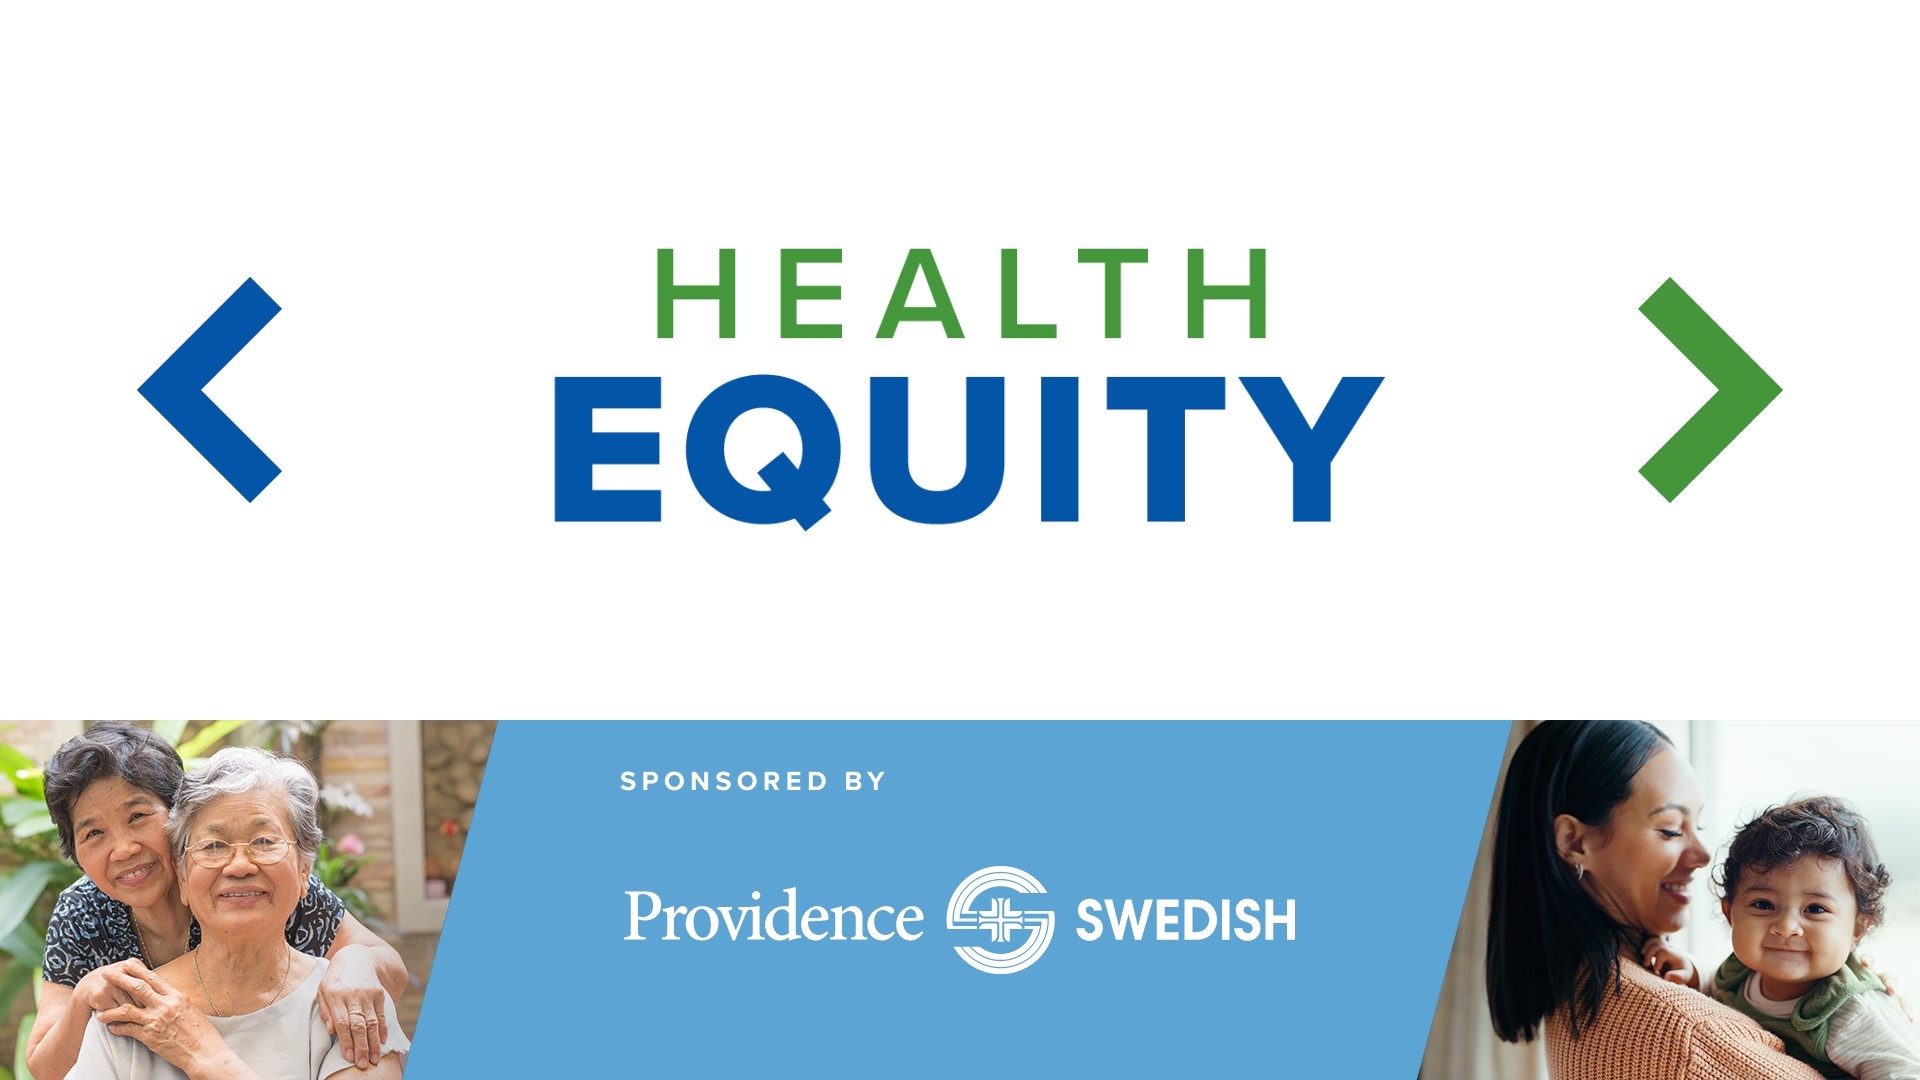 There are still large margins of people without equal access to quality healthcare, but Providence Swedish is working to fix that. Sponsored by Providence Swedish.